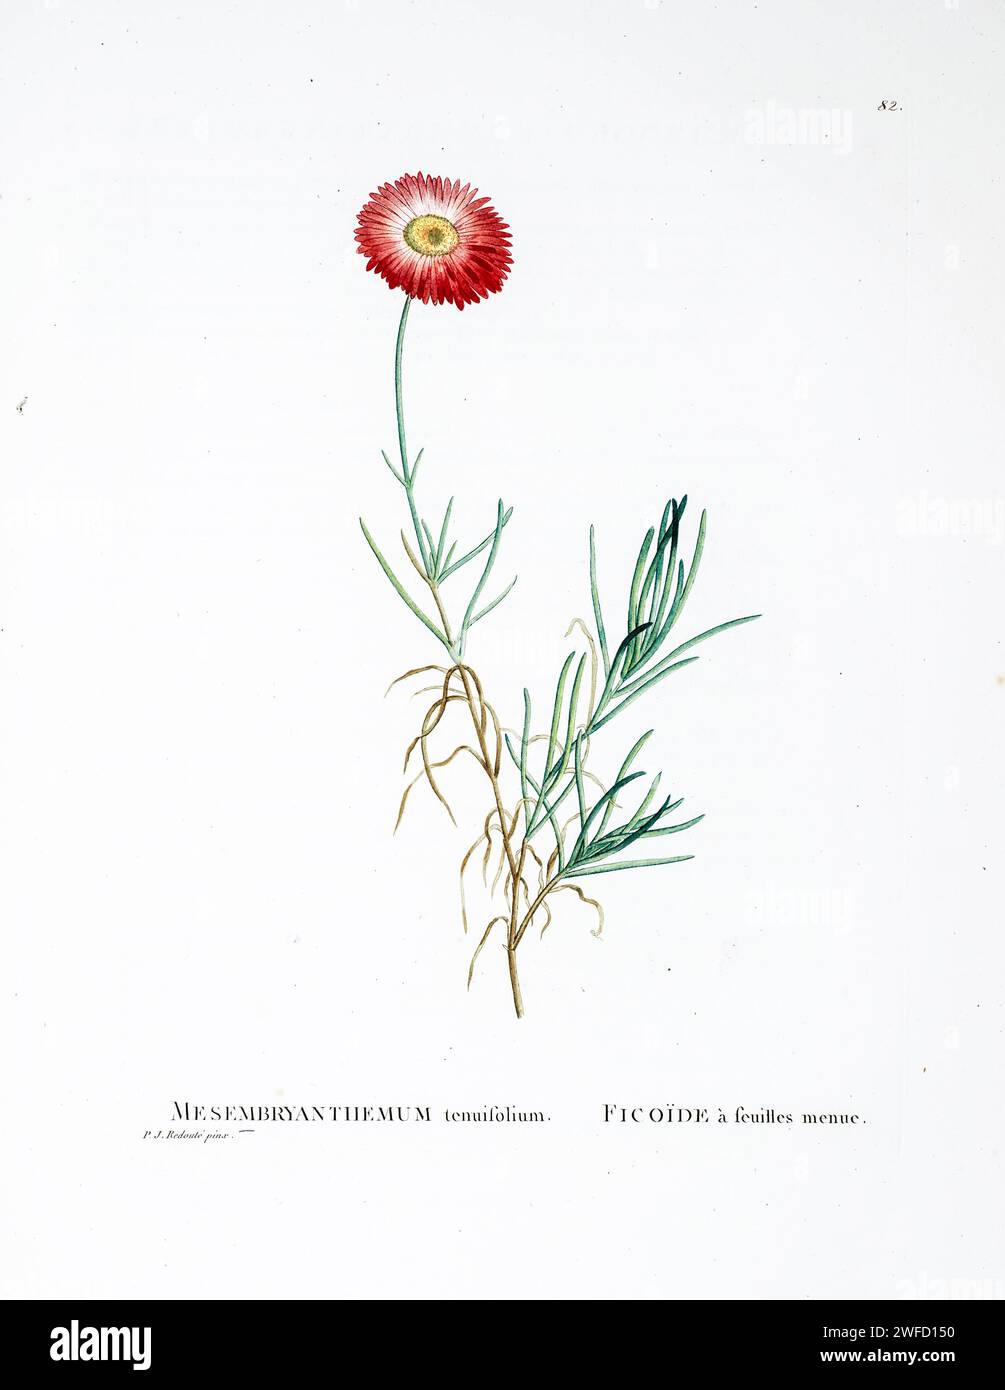 Lampranthus tenuifolius (L.) Schwant. Here As Mesembryanthemum tenuifolium from History of Succulent Plants [Plantarum historia succulentarum / Histoire des plantes grasses] painted by Pierre-Joseph Redouté and described by Augustin Pyramus de Candolle 1799  Lampranthus tenuifolius, the narrow-leaf brightfig, is a critically endangered species of succulent plant that is endemic to the Cape Flats Dune Strandveld around Cape Town, South Africa. Stock Photo